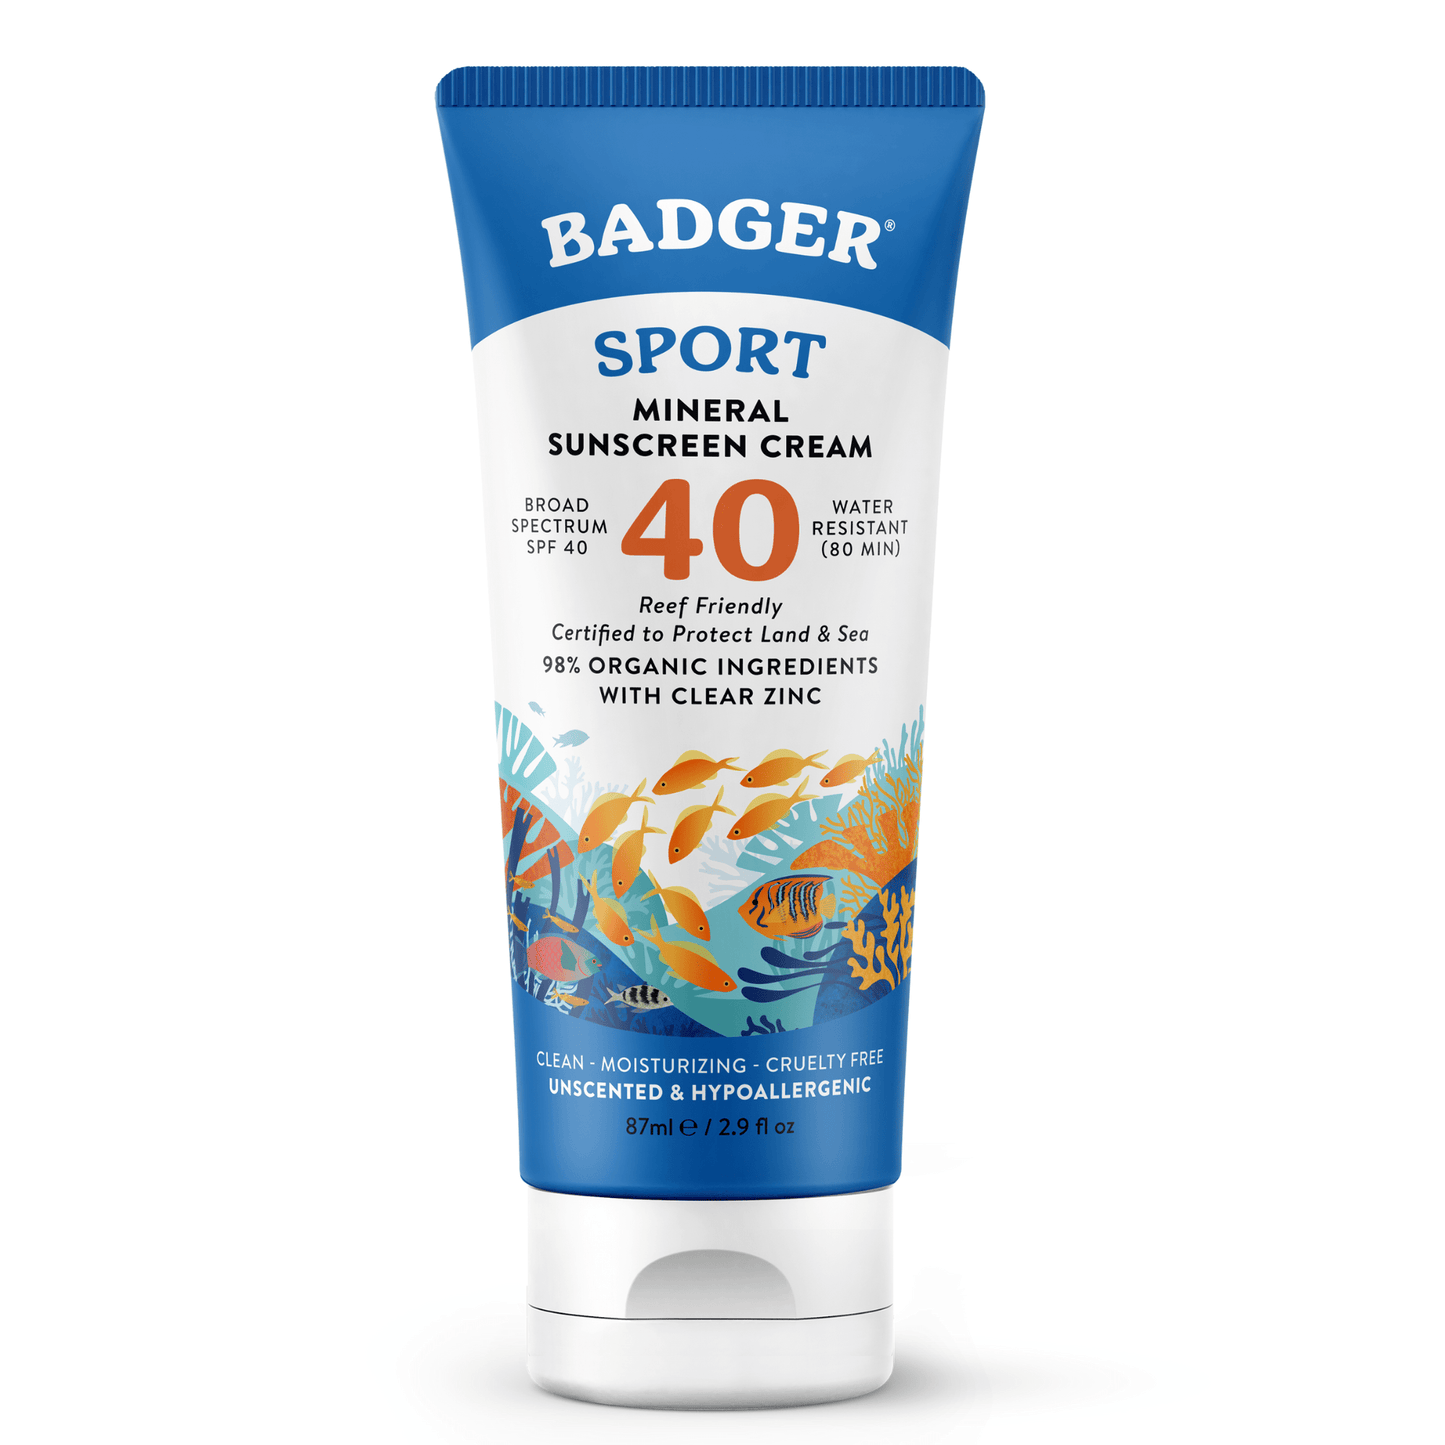 Primary Image of Sport Mineral Sunscreen Cream SPF 40